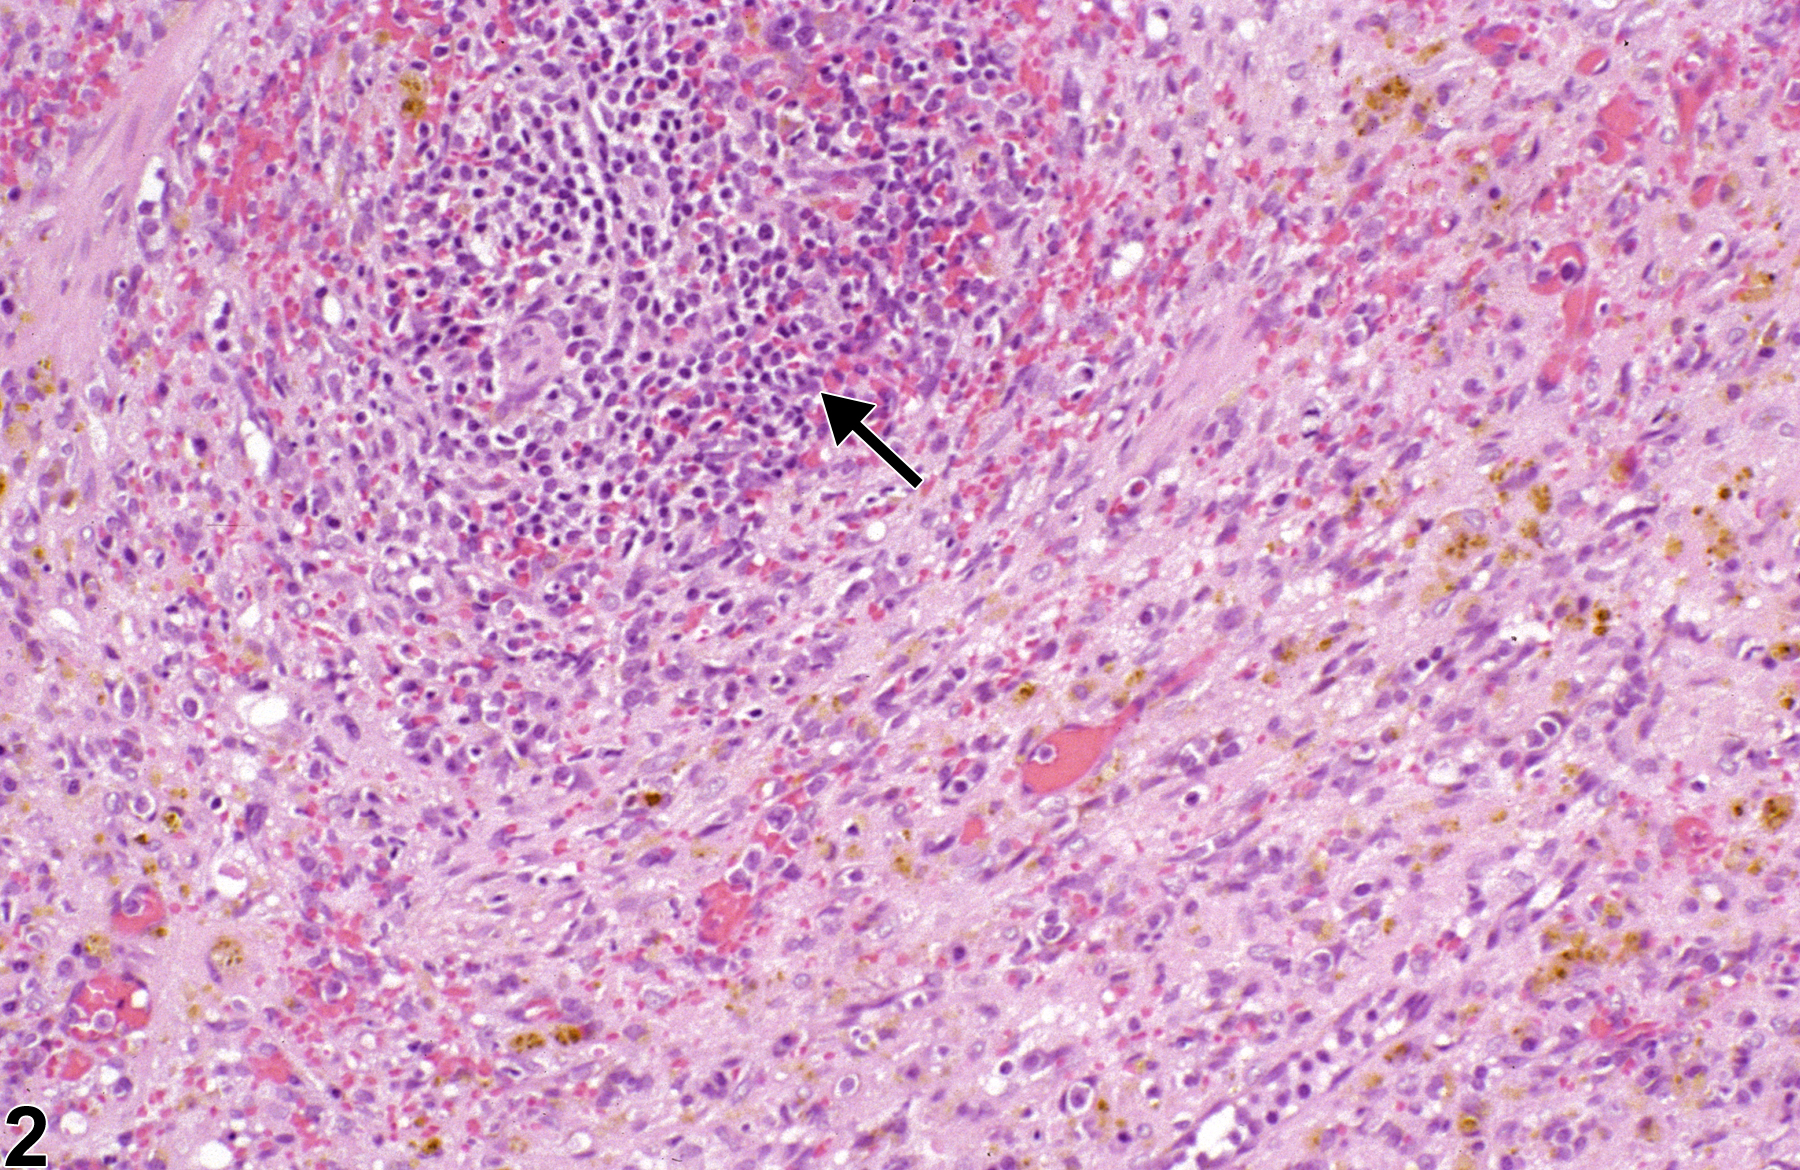 Image of fibrosis in the spleen from a male F344/N rat in a chronic study